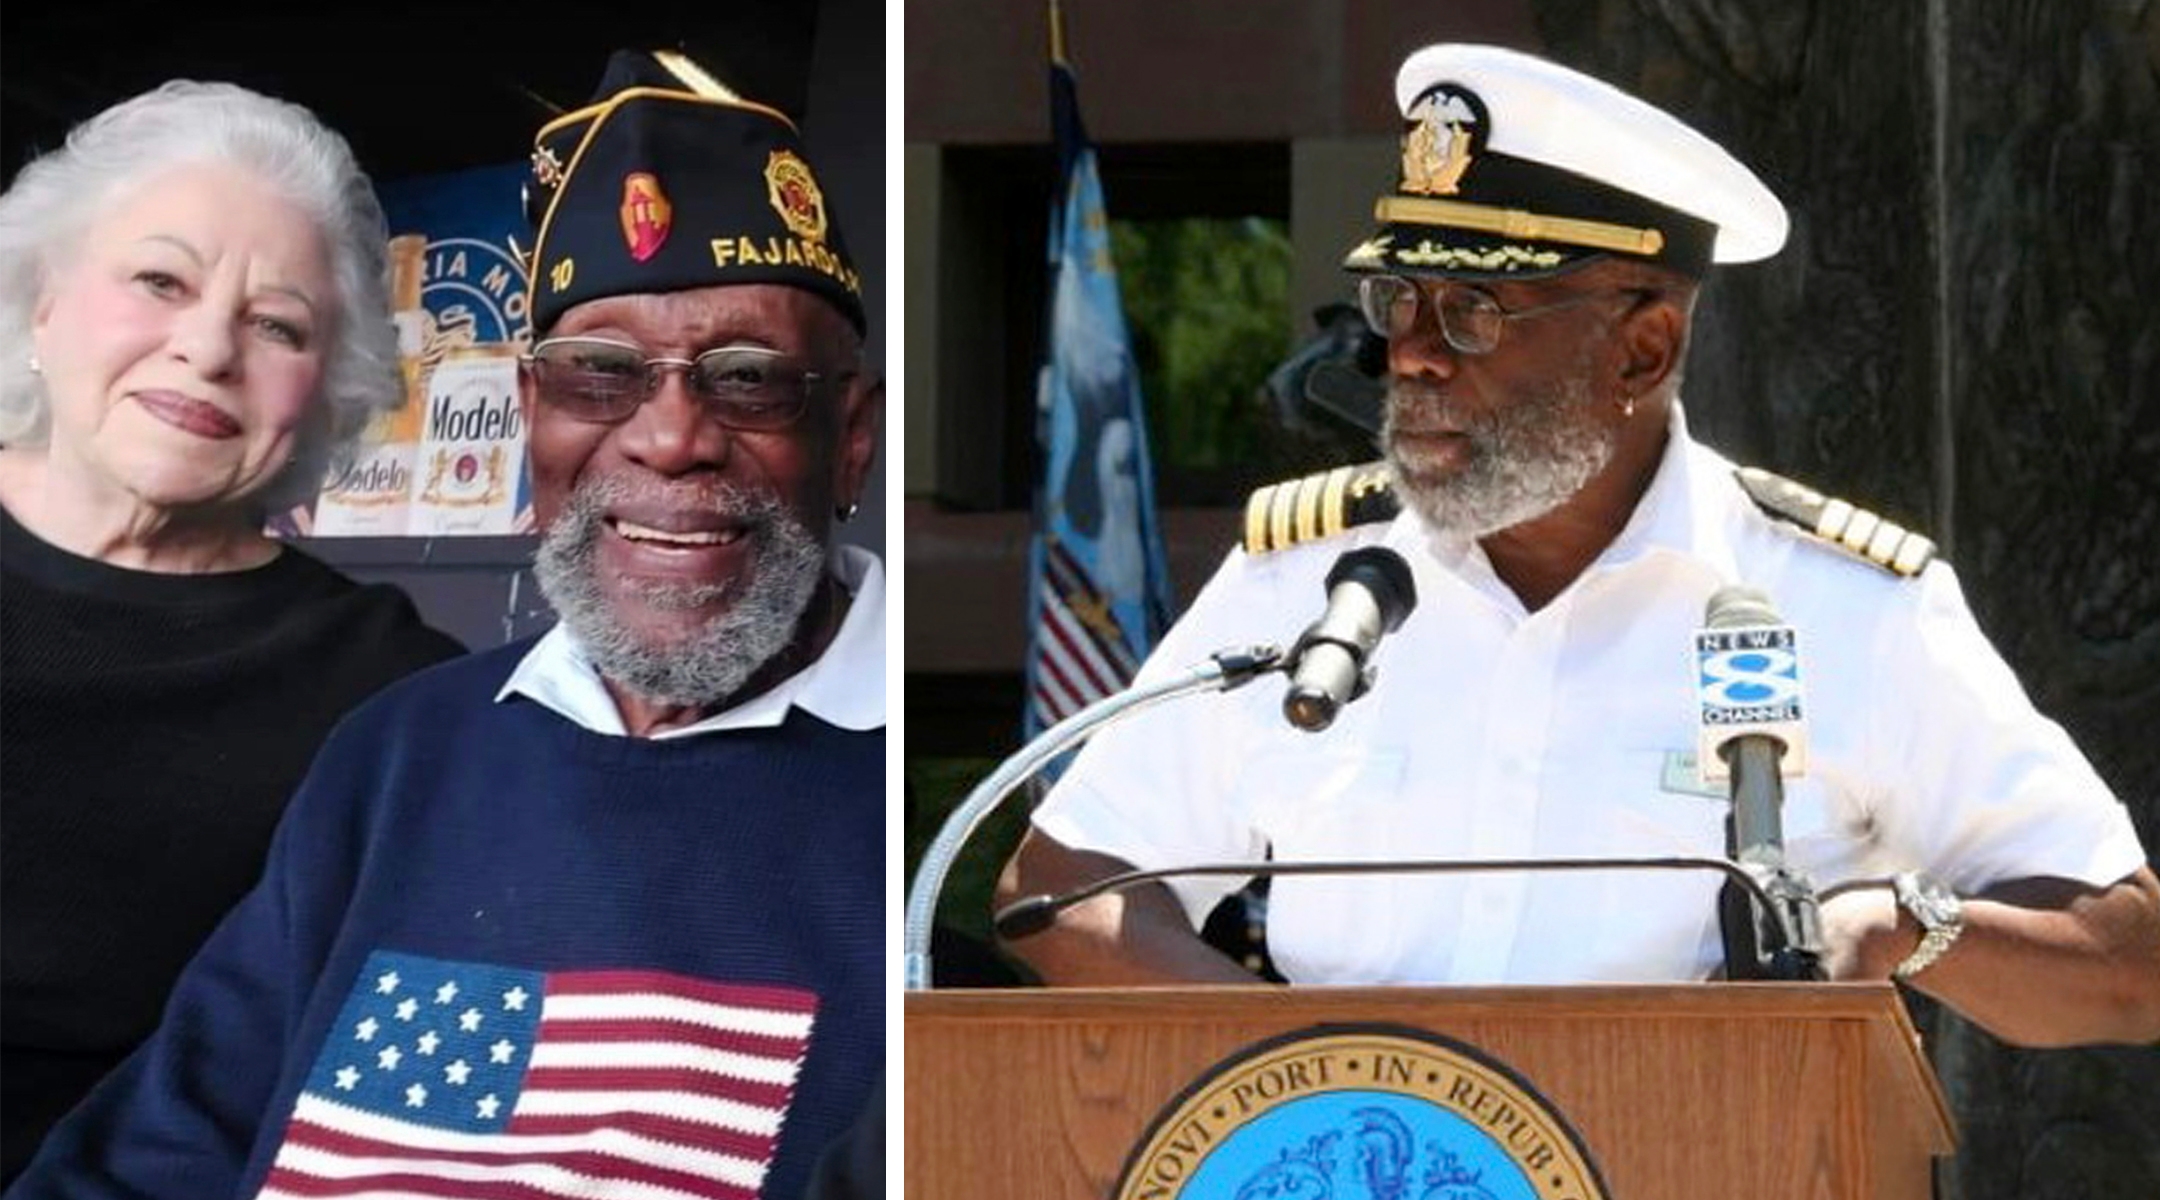 Left, Bill Pinkney and his former wife, Chicago food celebrity Ina Pinkney (Courtesy Ina Pinkney); at right, Capt. Bill Pinkney speaking in New Haven, Connecticut. (©2021Captain Bill Pinkney)